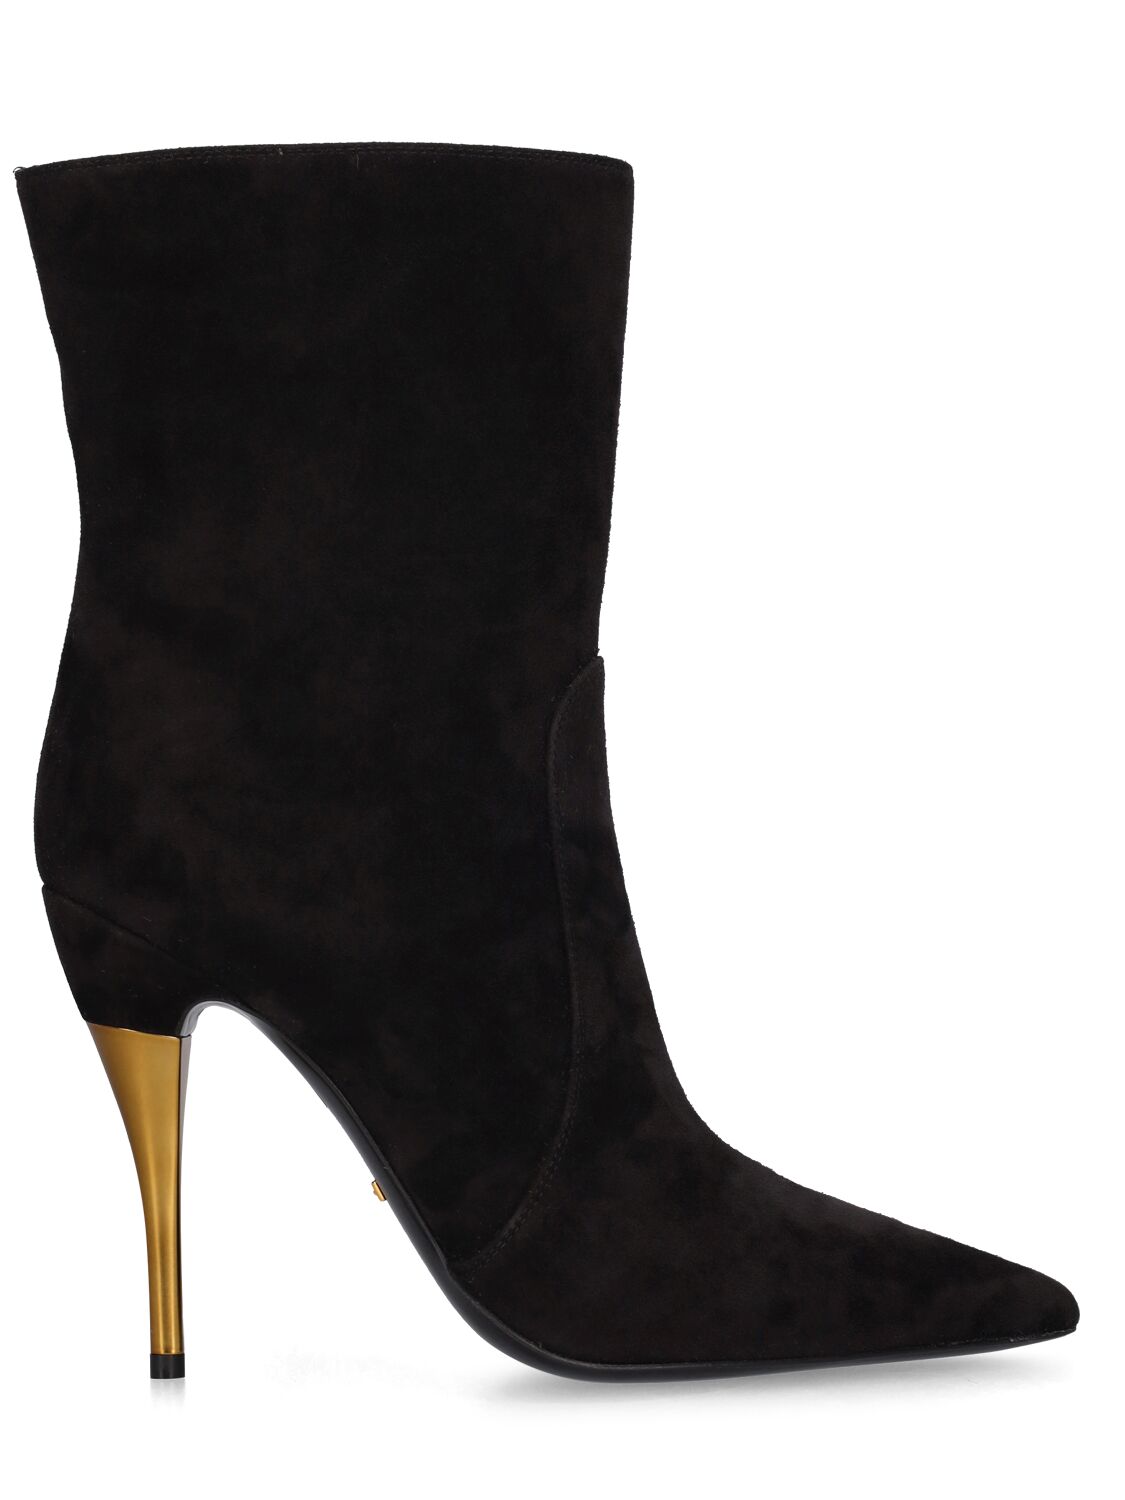 GUCCI 105MM SUEDE ZIP-UP ANKLE BOOTS